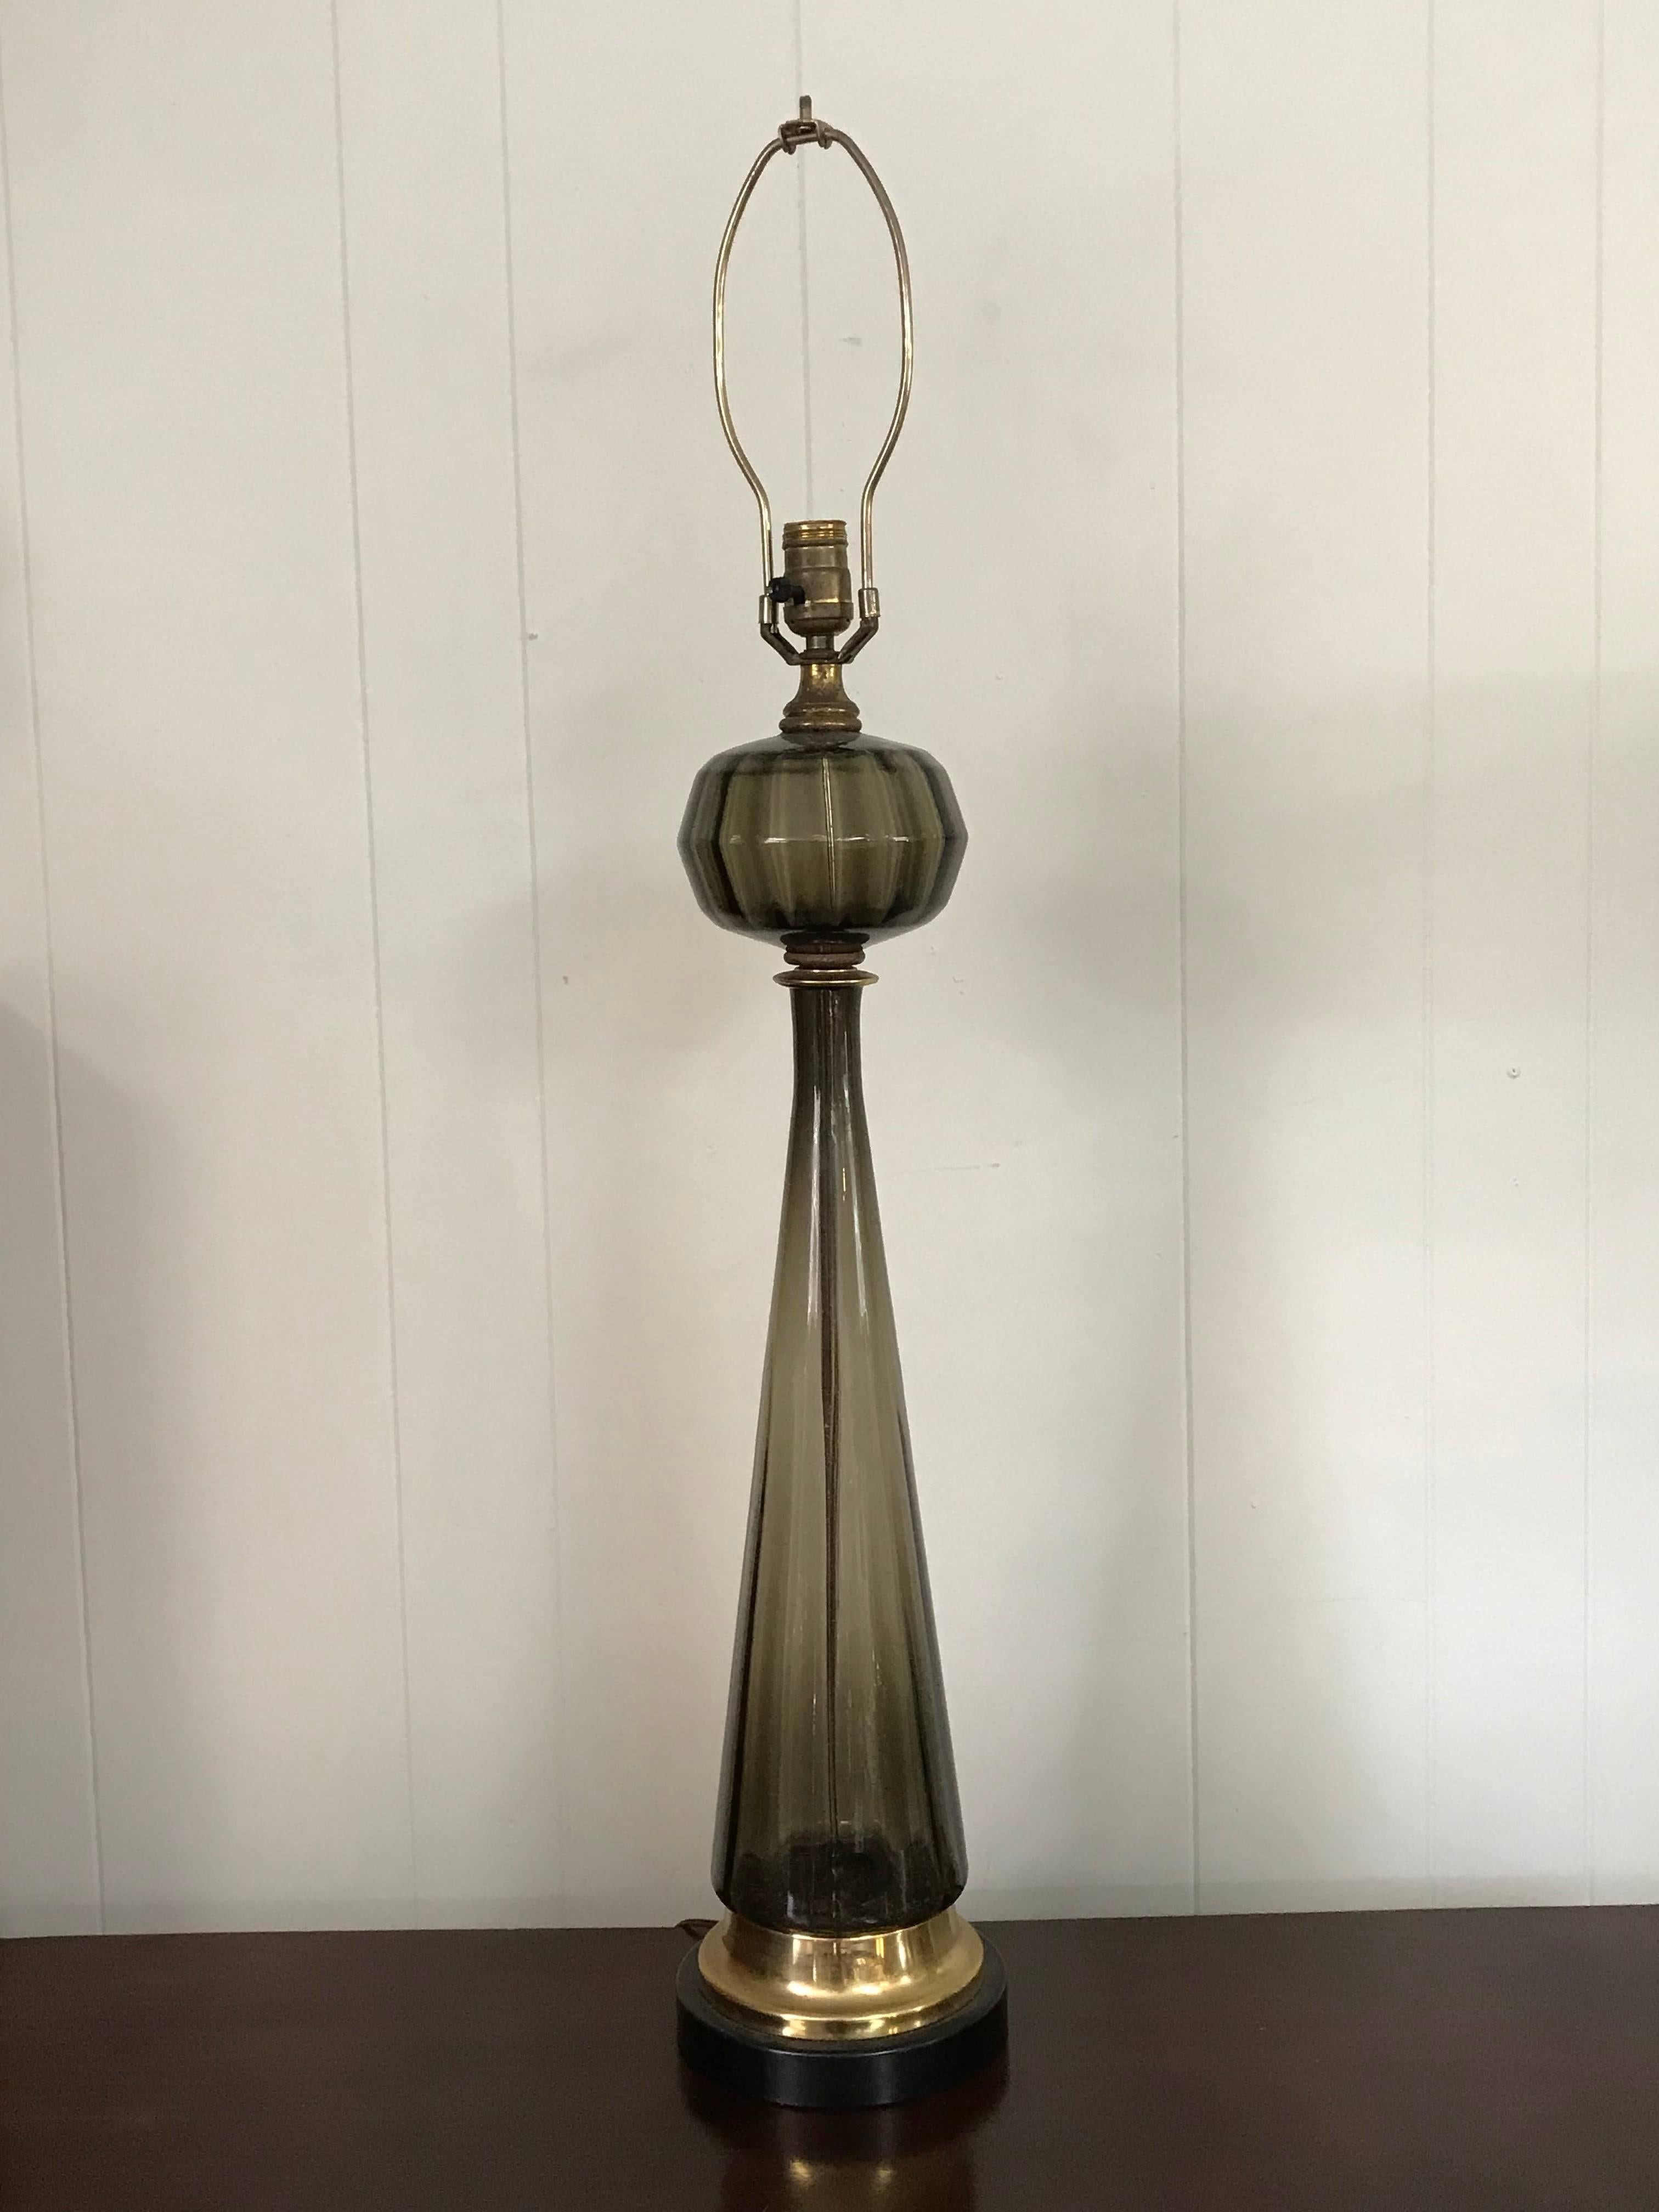 Offered is an absolutely stunning, 1960s large Italian Murano gray glass and brass lamp with a custom hand painted modern fiberglass shade. Measures: 38.75